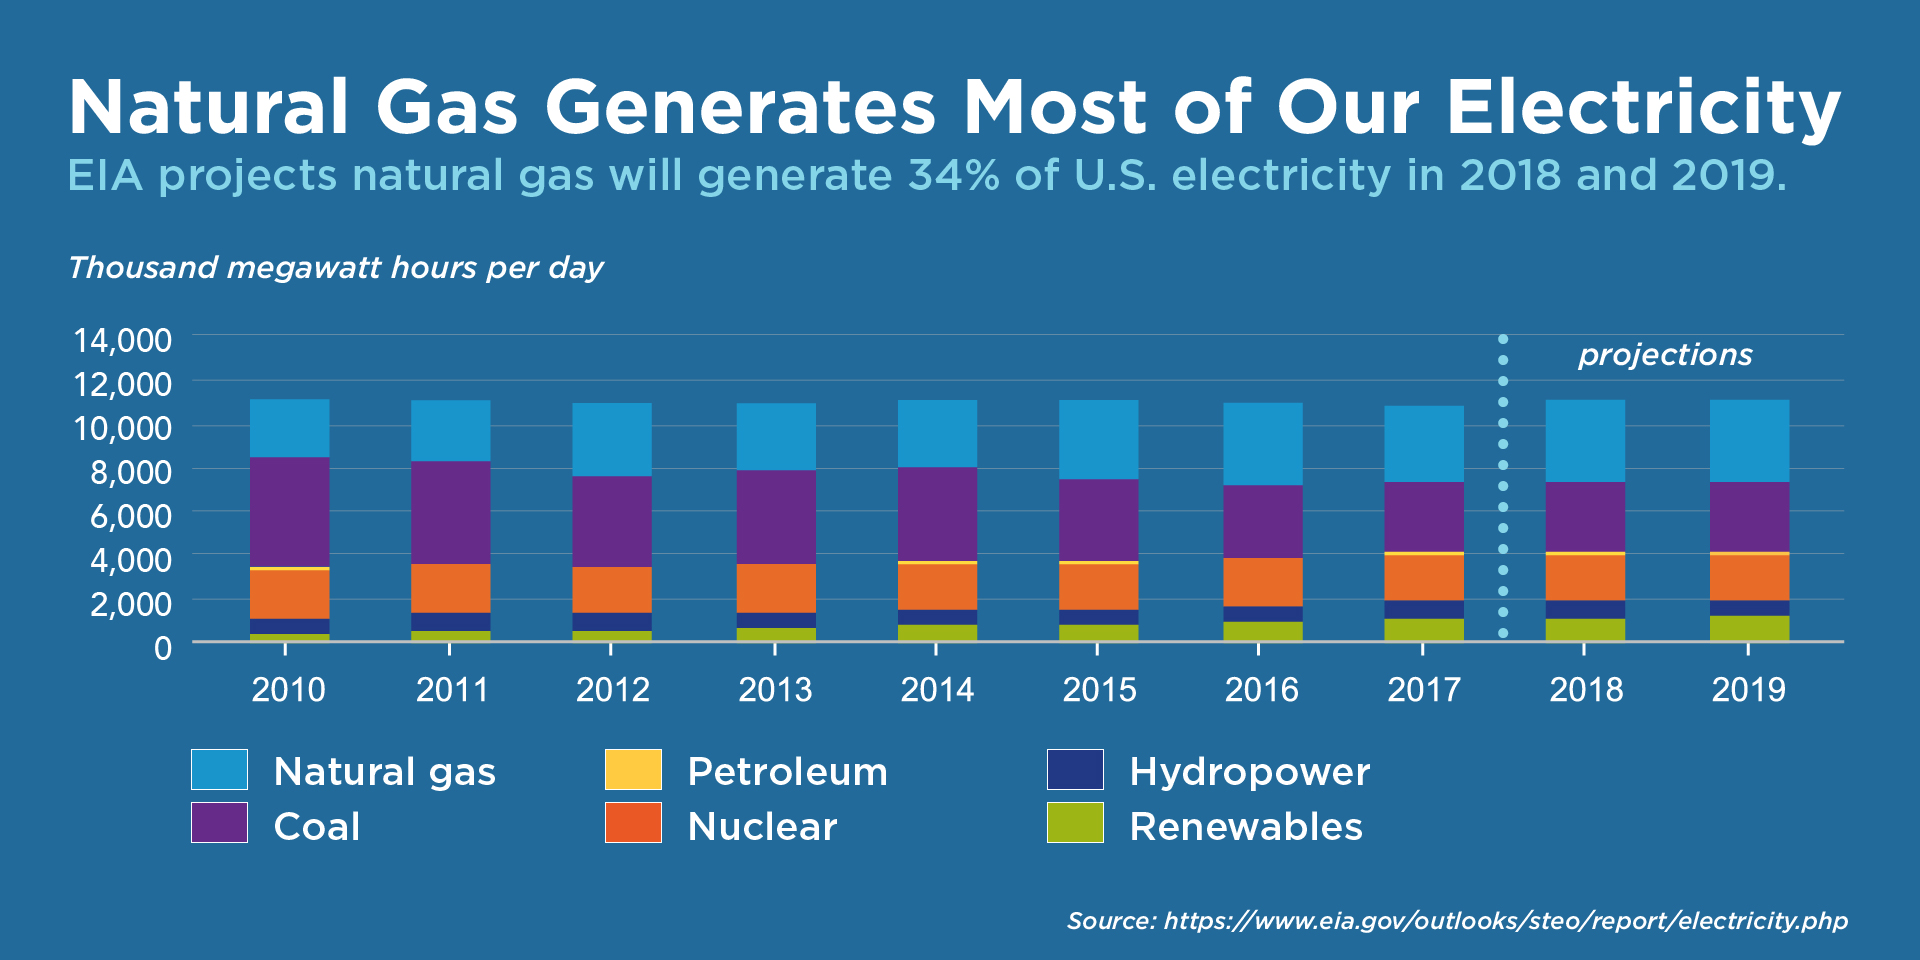 Natural Gas Generates Most of Our Electricity